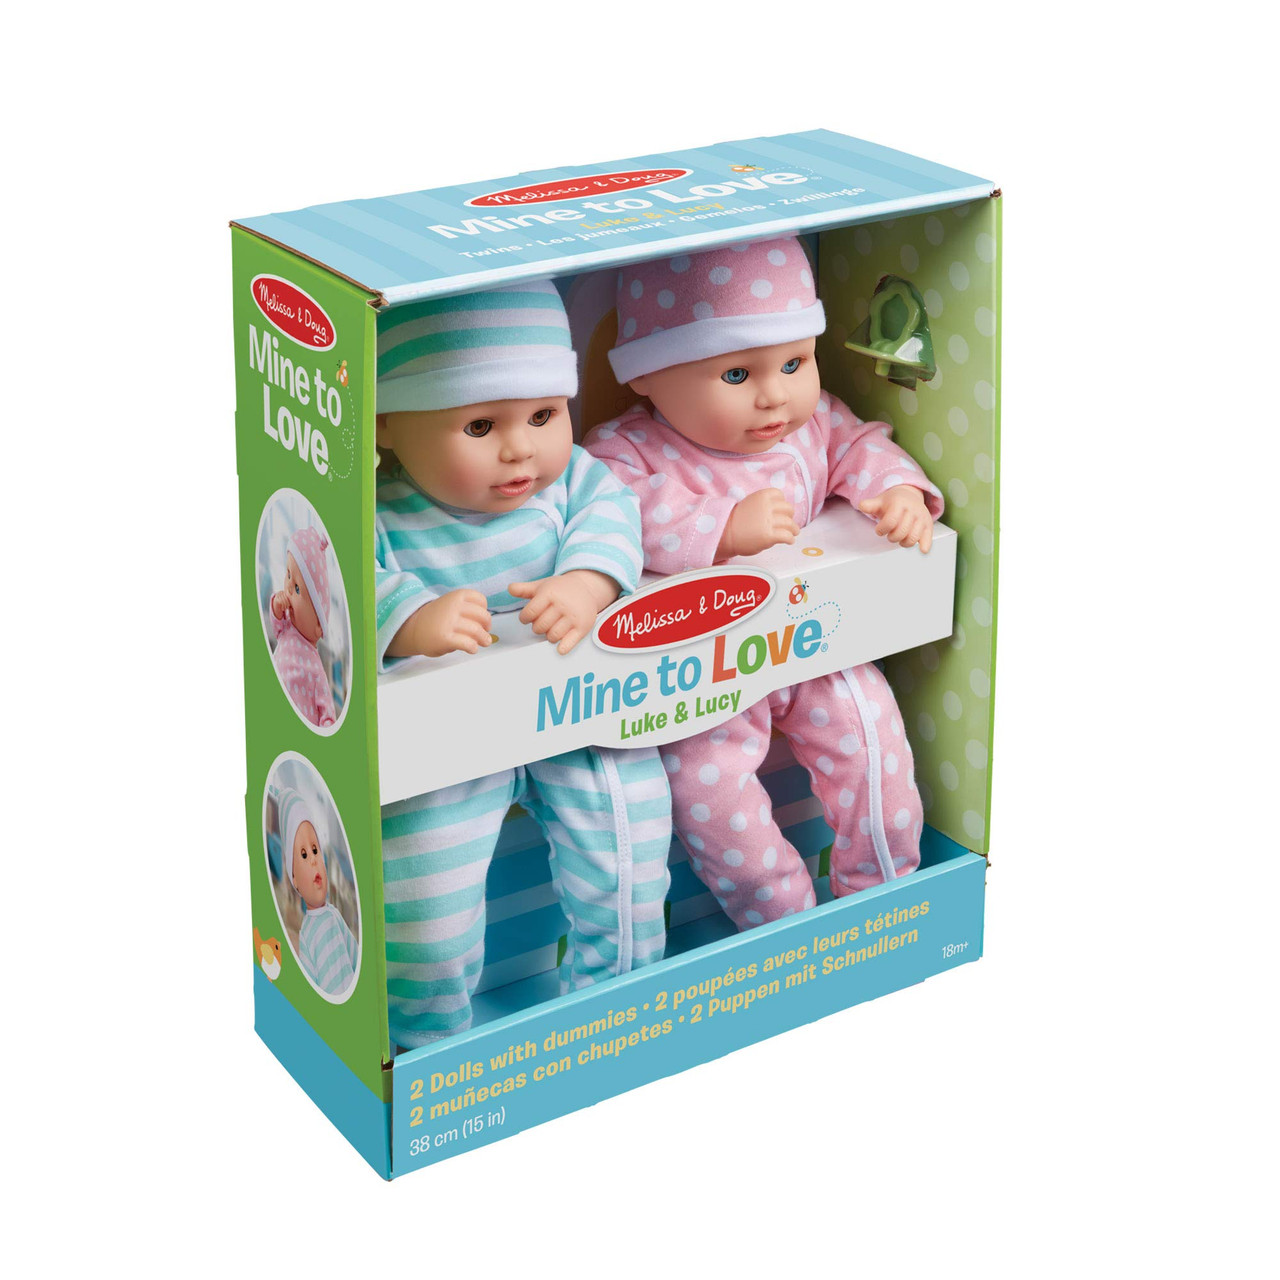 Baby Products Online - Melissa and Doug My Love Mariana 12